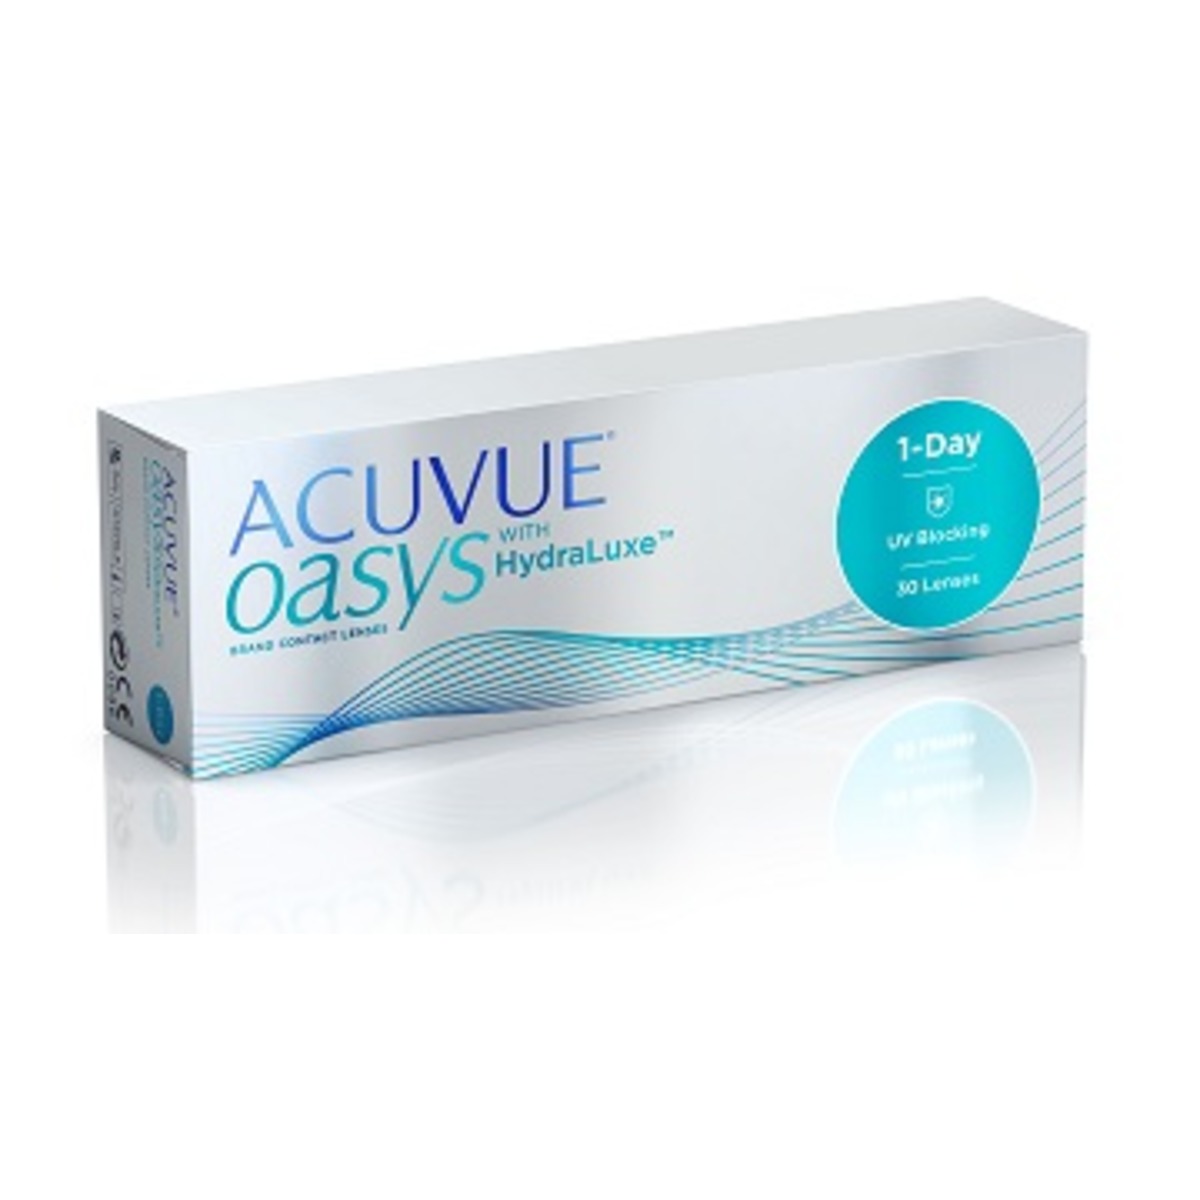 1 Day Acuvue Oasys With HydraLuxe 30L